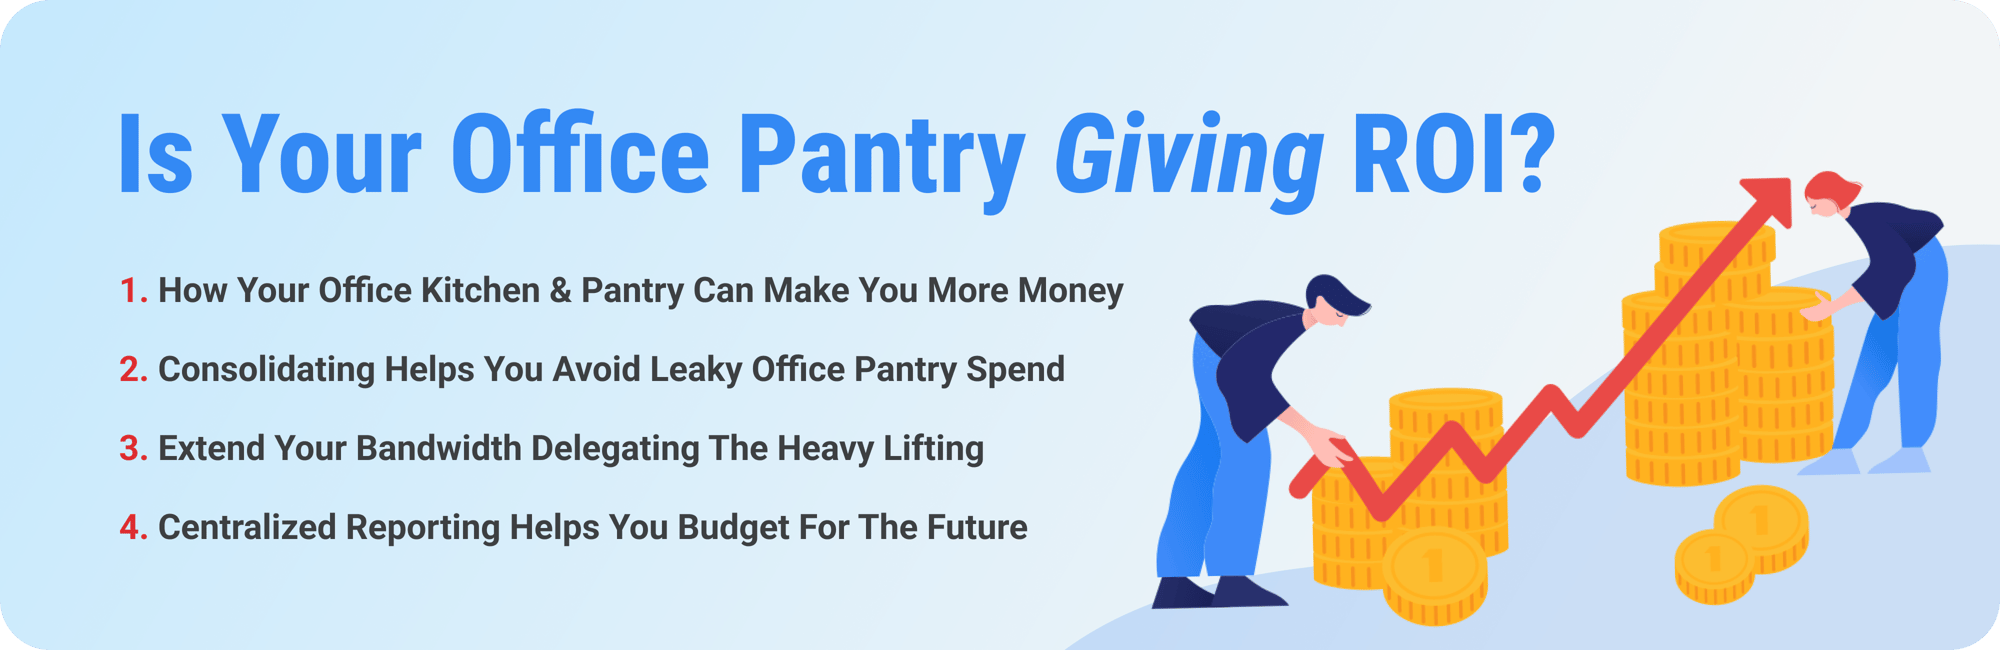 Is Your Office Pantry Giving ROI?